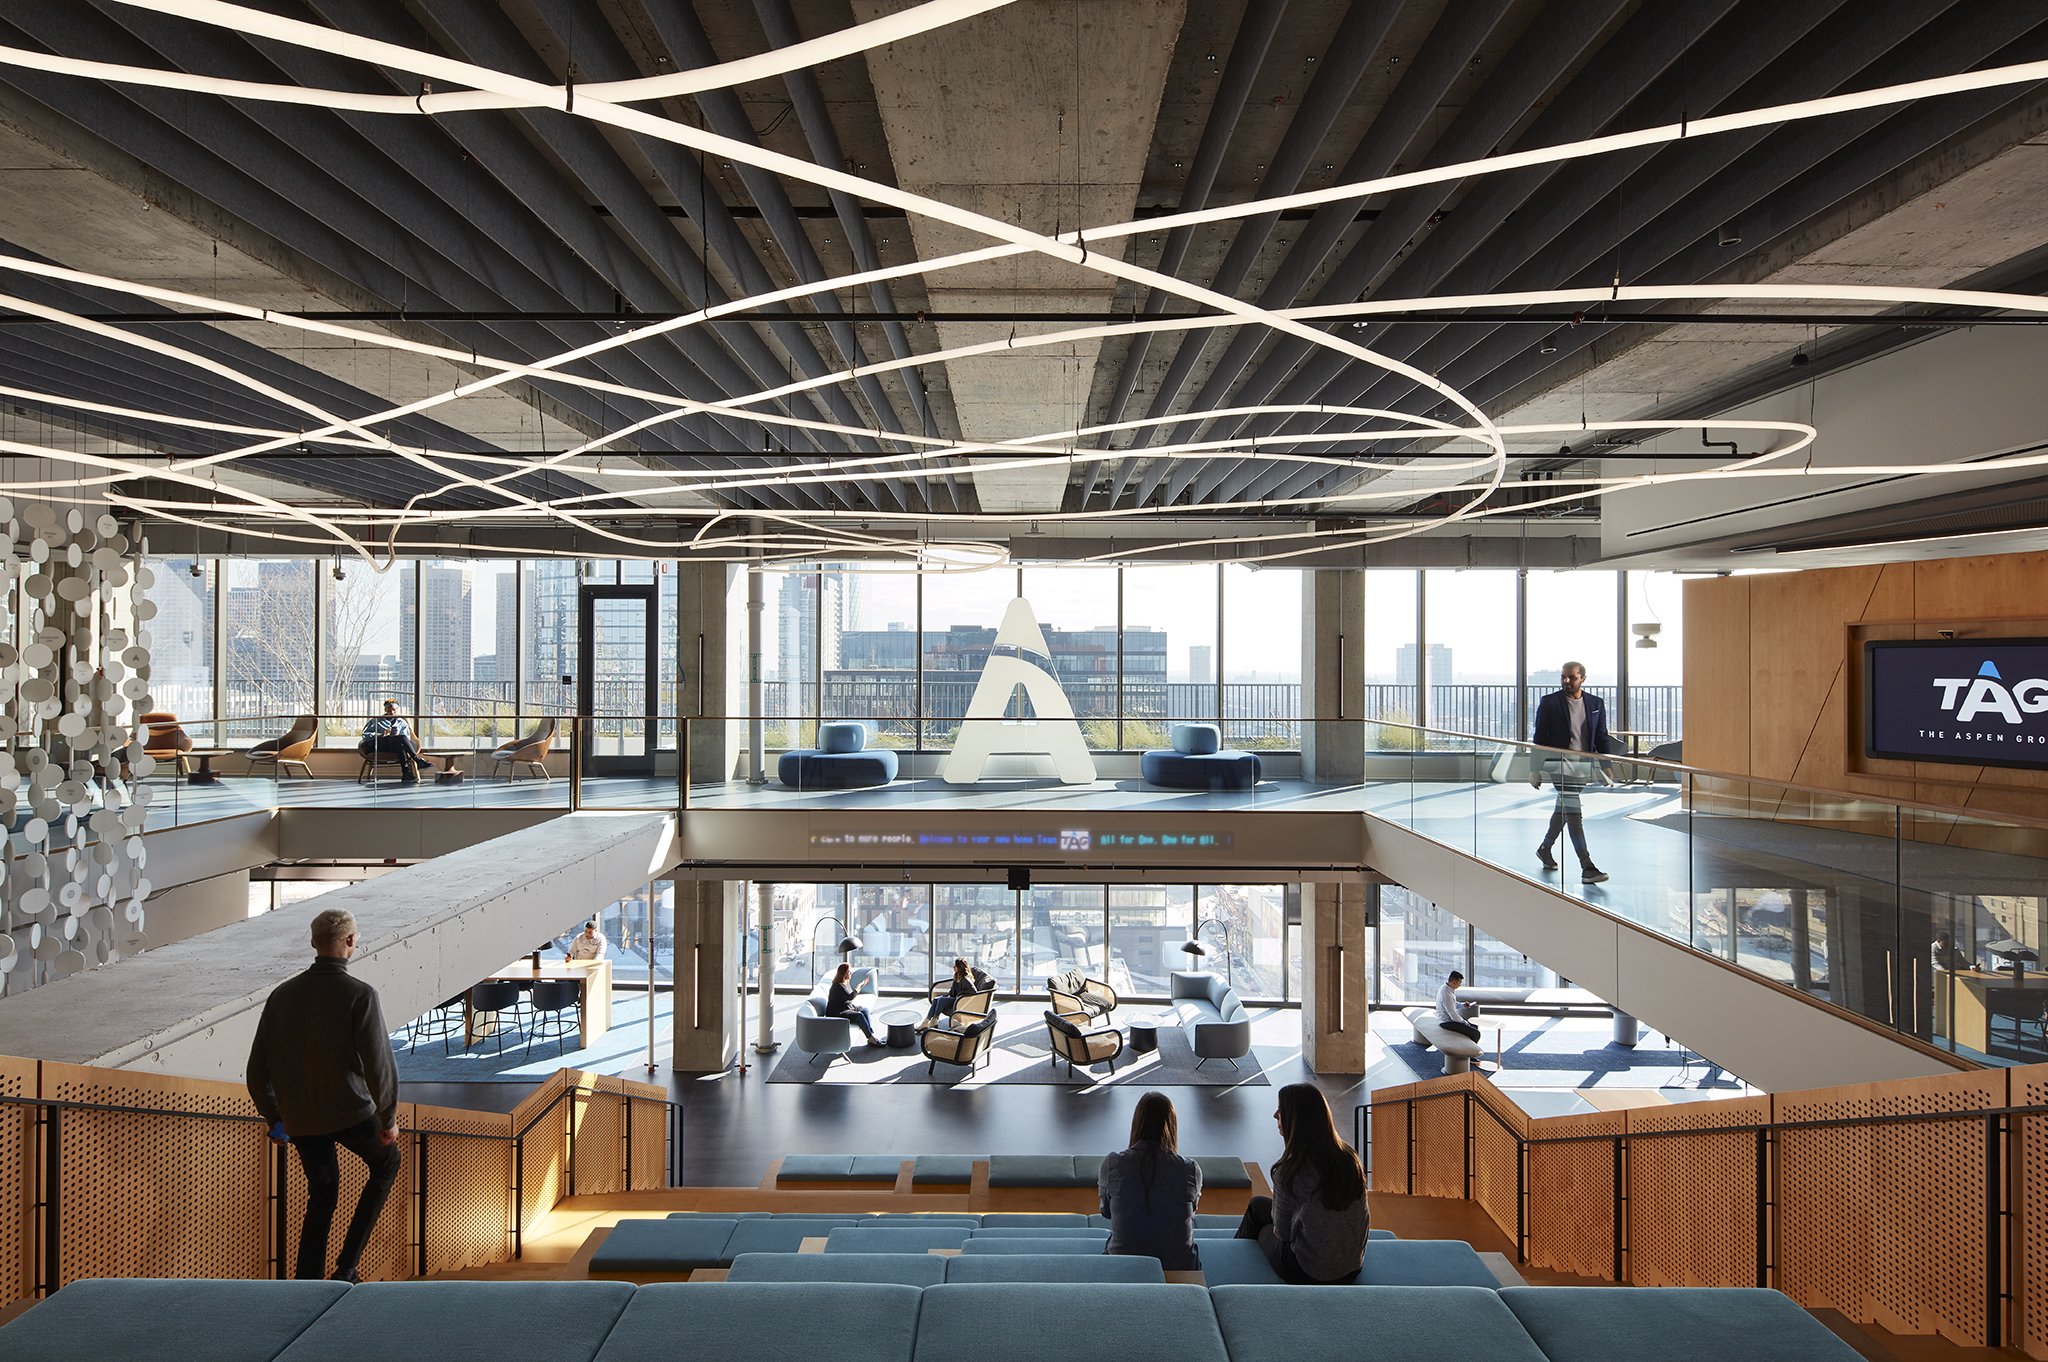  AWARDS  Interior Design’s Best of Year, Large Corporate Office, Honoree, 2022    Aspen Group  Perkins+Will  Chicago, IL     Steve Hall  